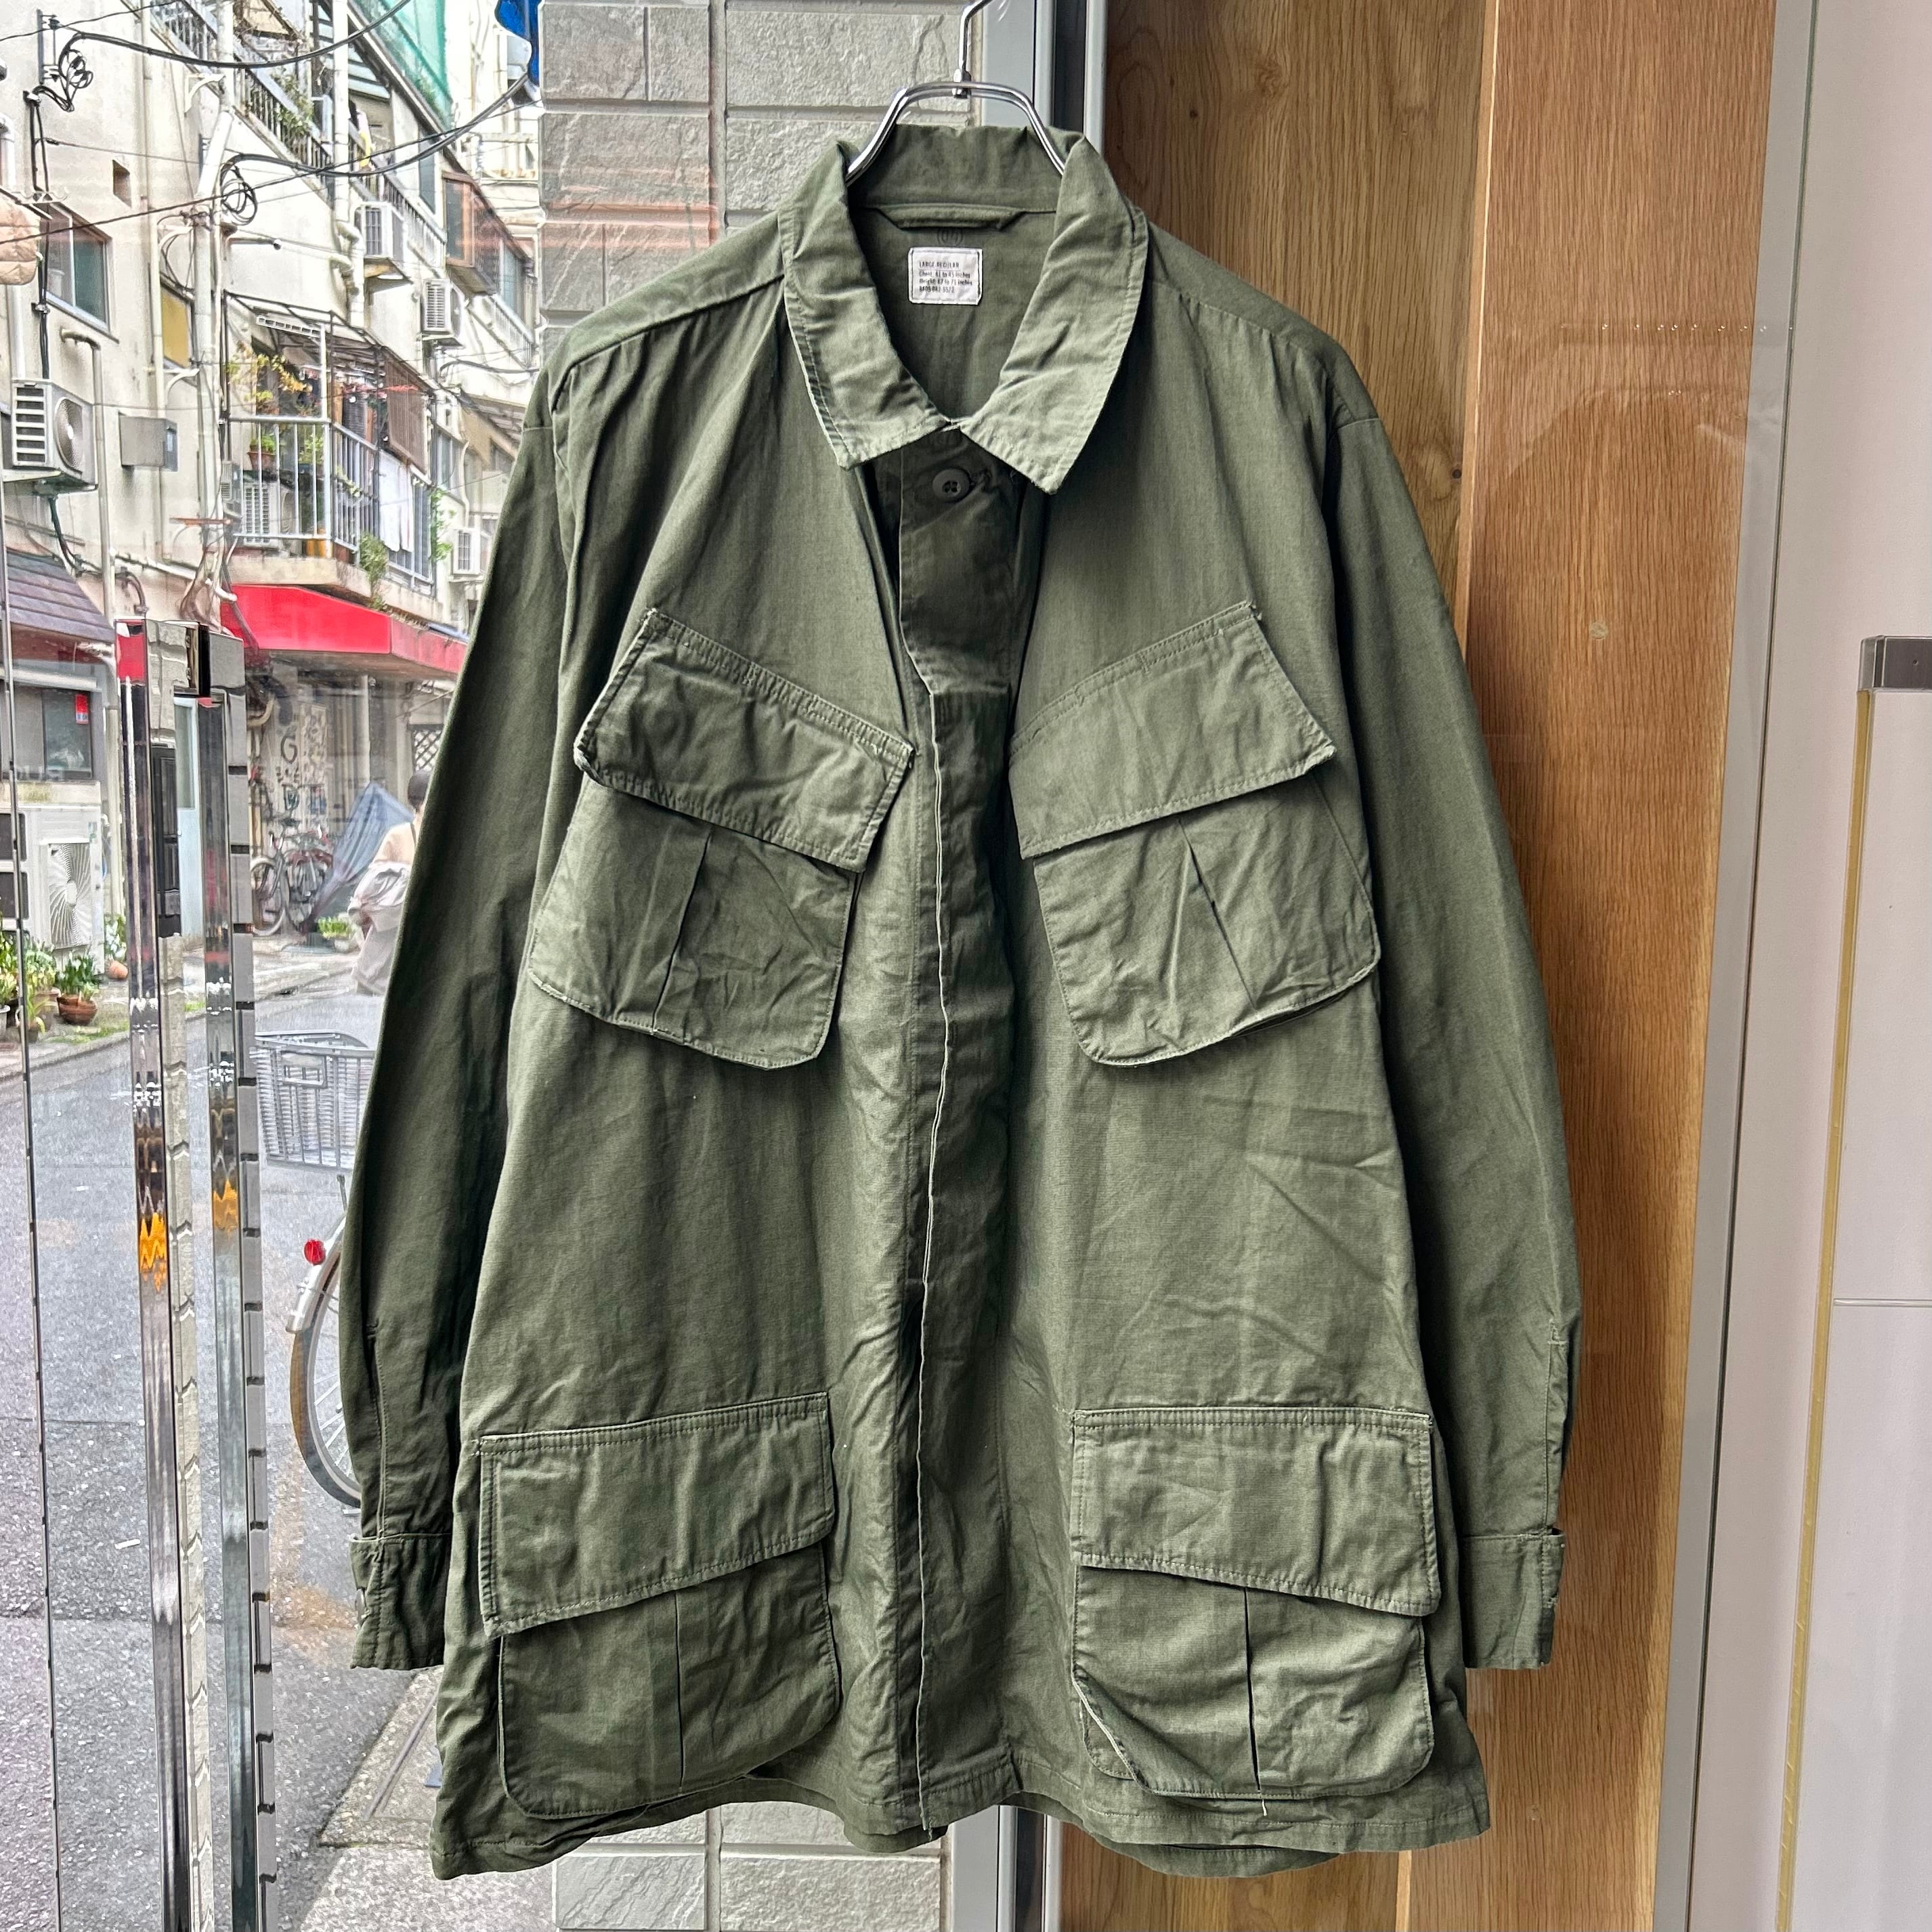 VINTAGE 60s US ARMY JUNGLE FATIGUE JACKET 3rd ジャングル